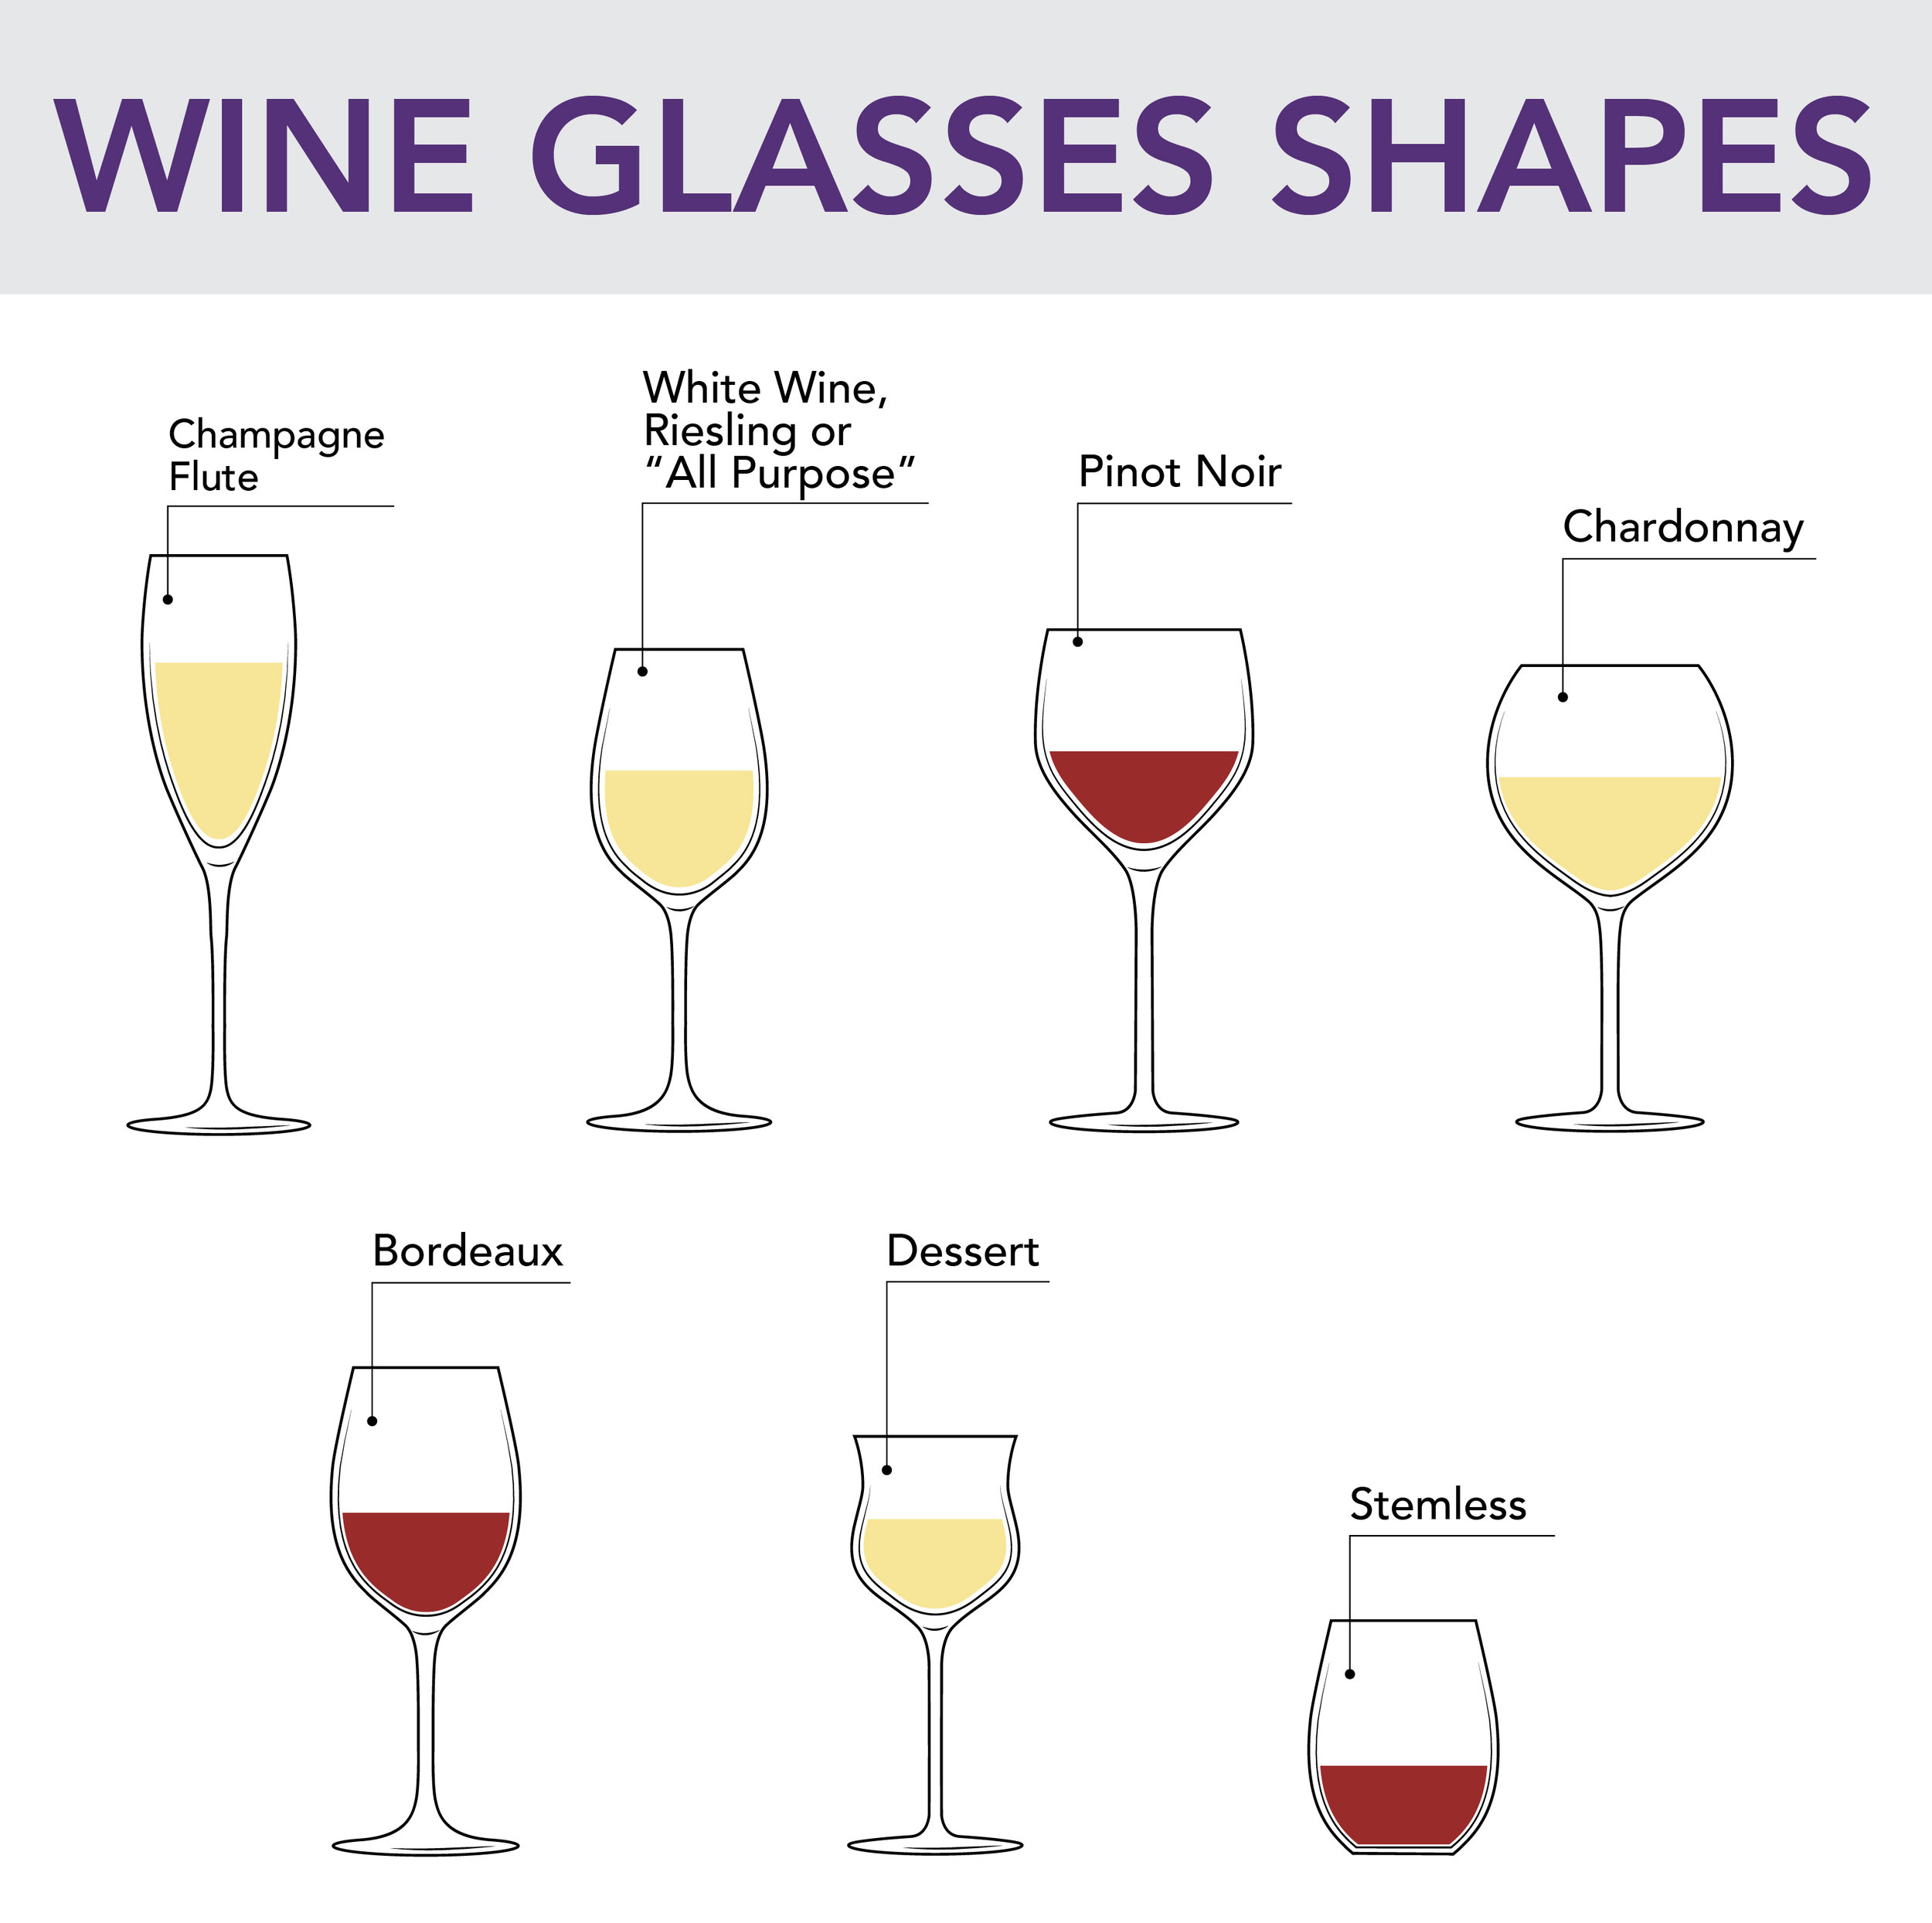 Wine Glasses Shapes Stems Cleaning And Care From The Vine